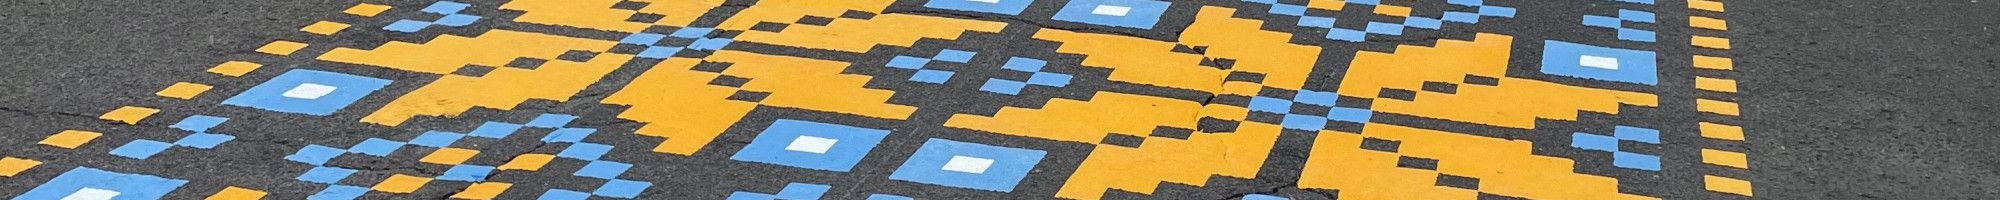 a blue and yellow mural on the road 